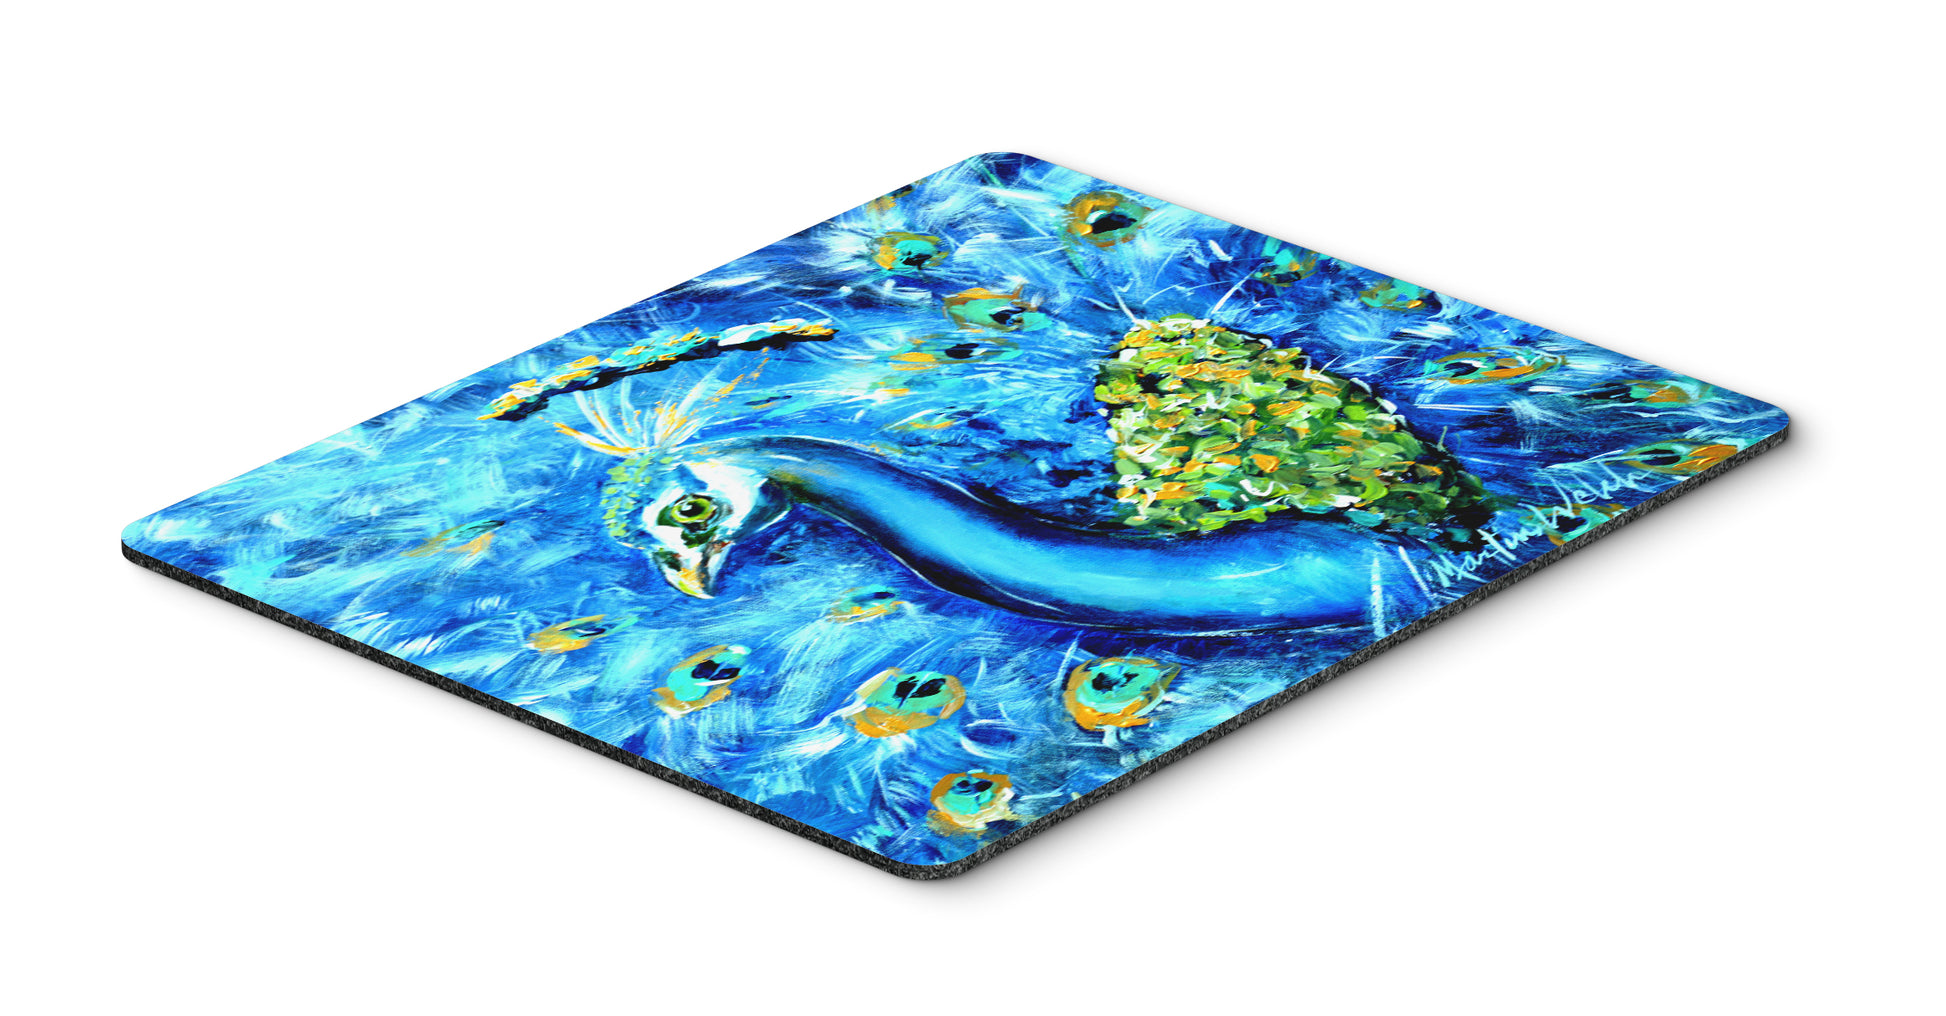 Buy this Peacock Straight Up in Blue Mouse Pad, Hot Pad or Trivet